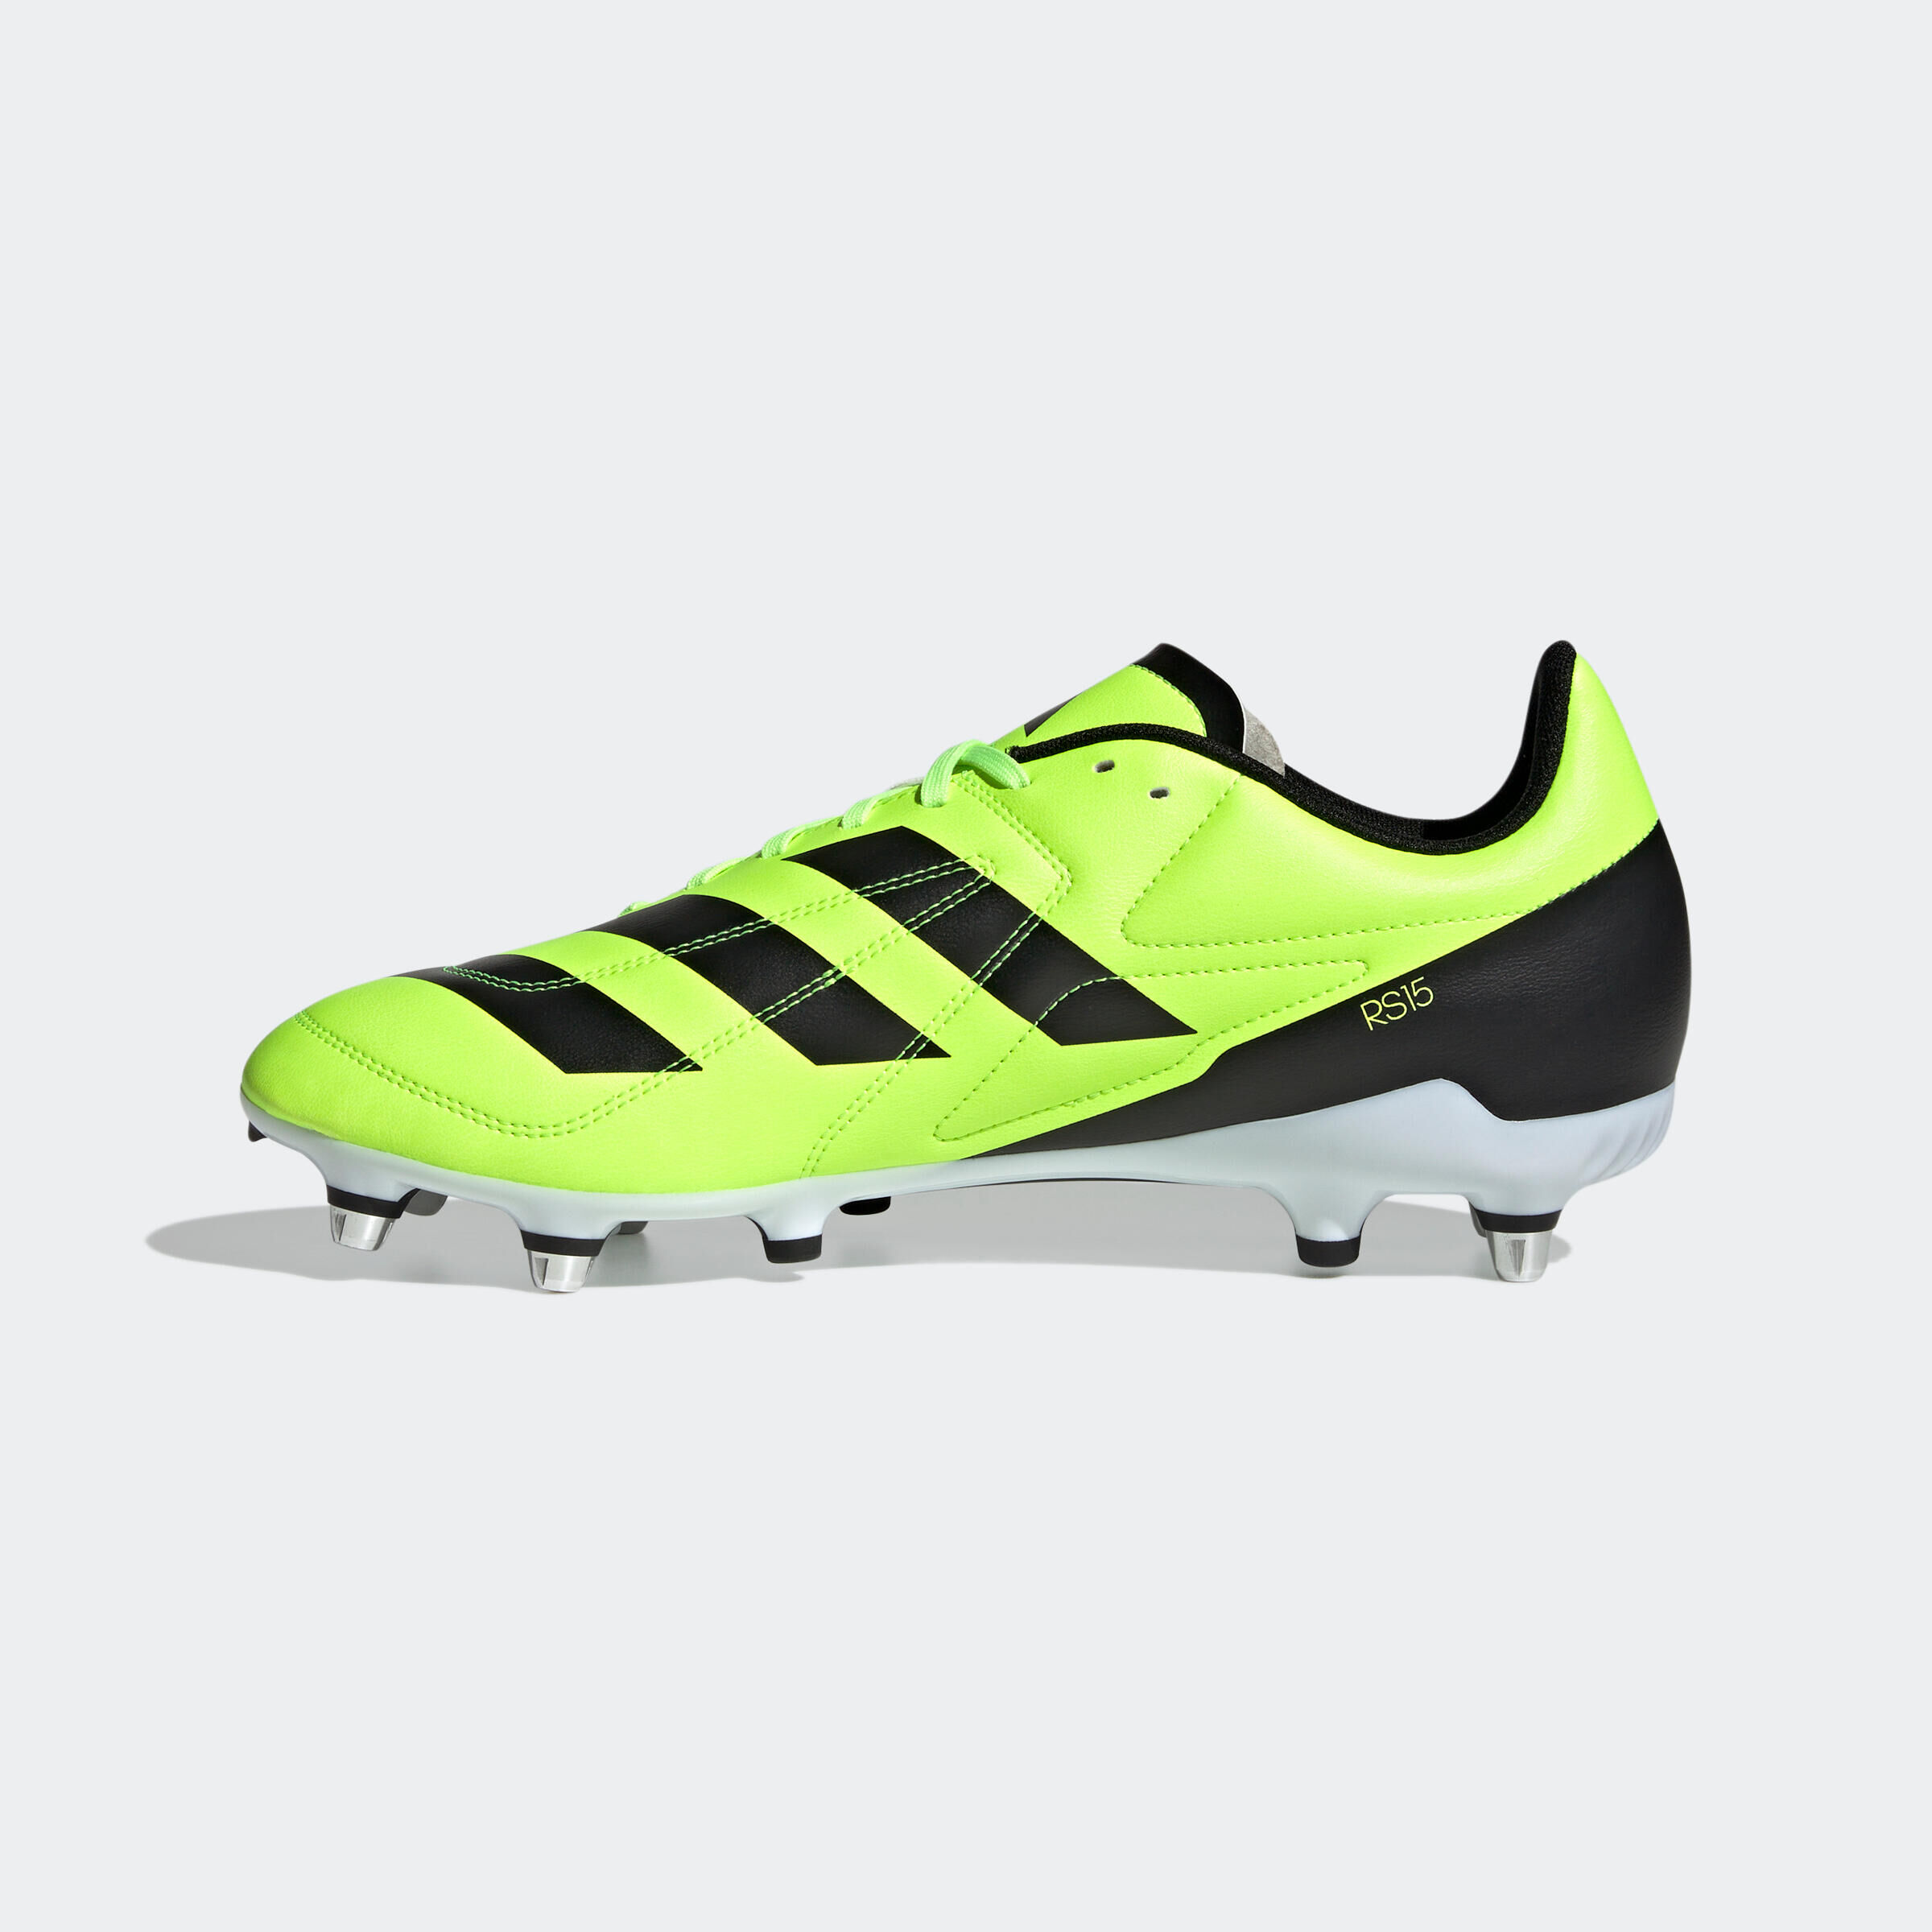 ADIDAS Adult Rugby Boots RS 15 SG Hybrid - Neon Yellow